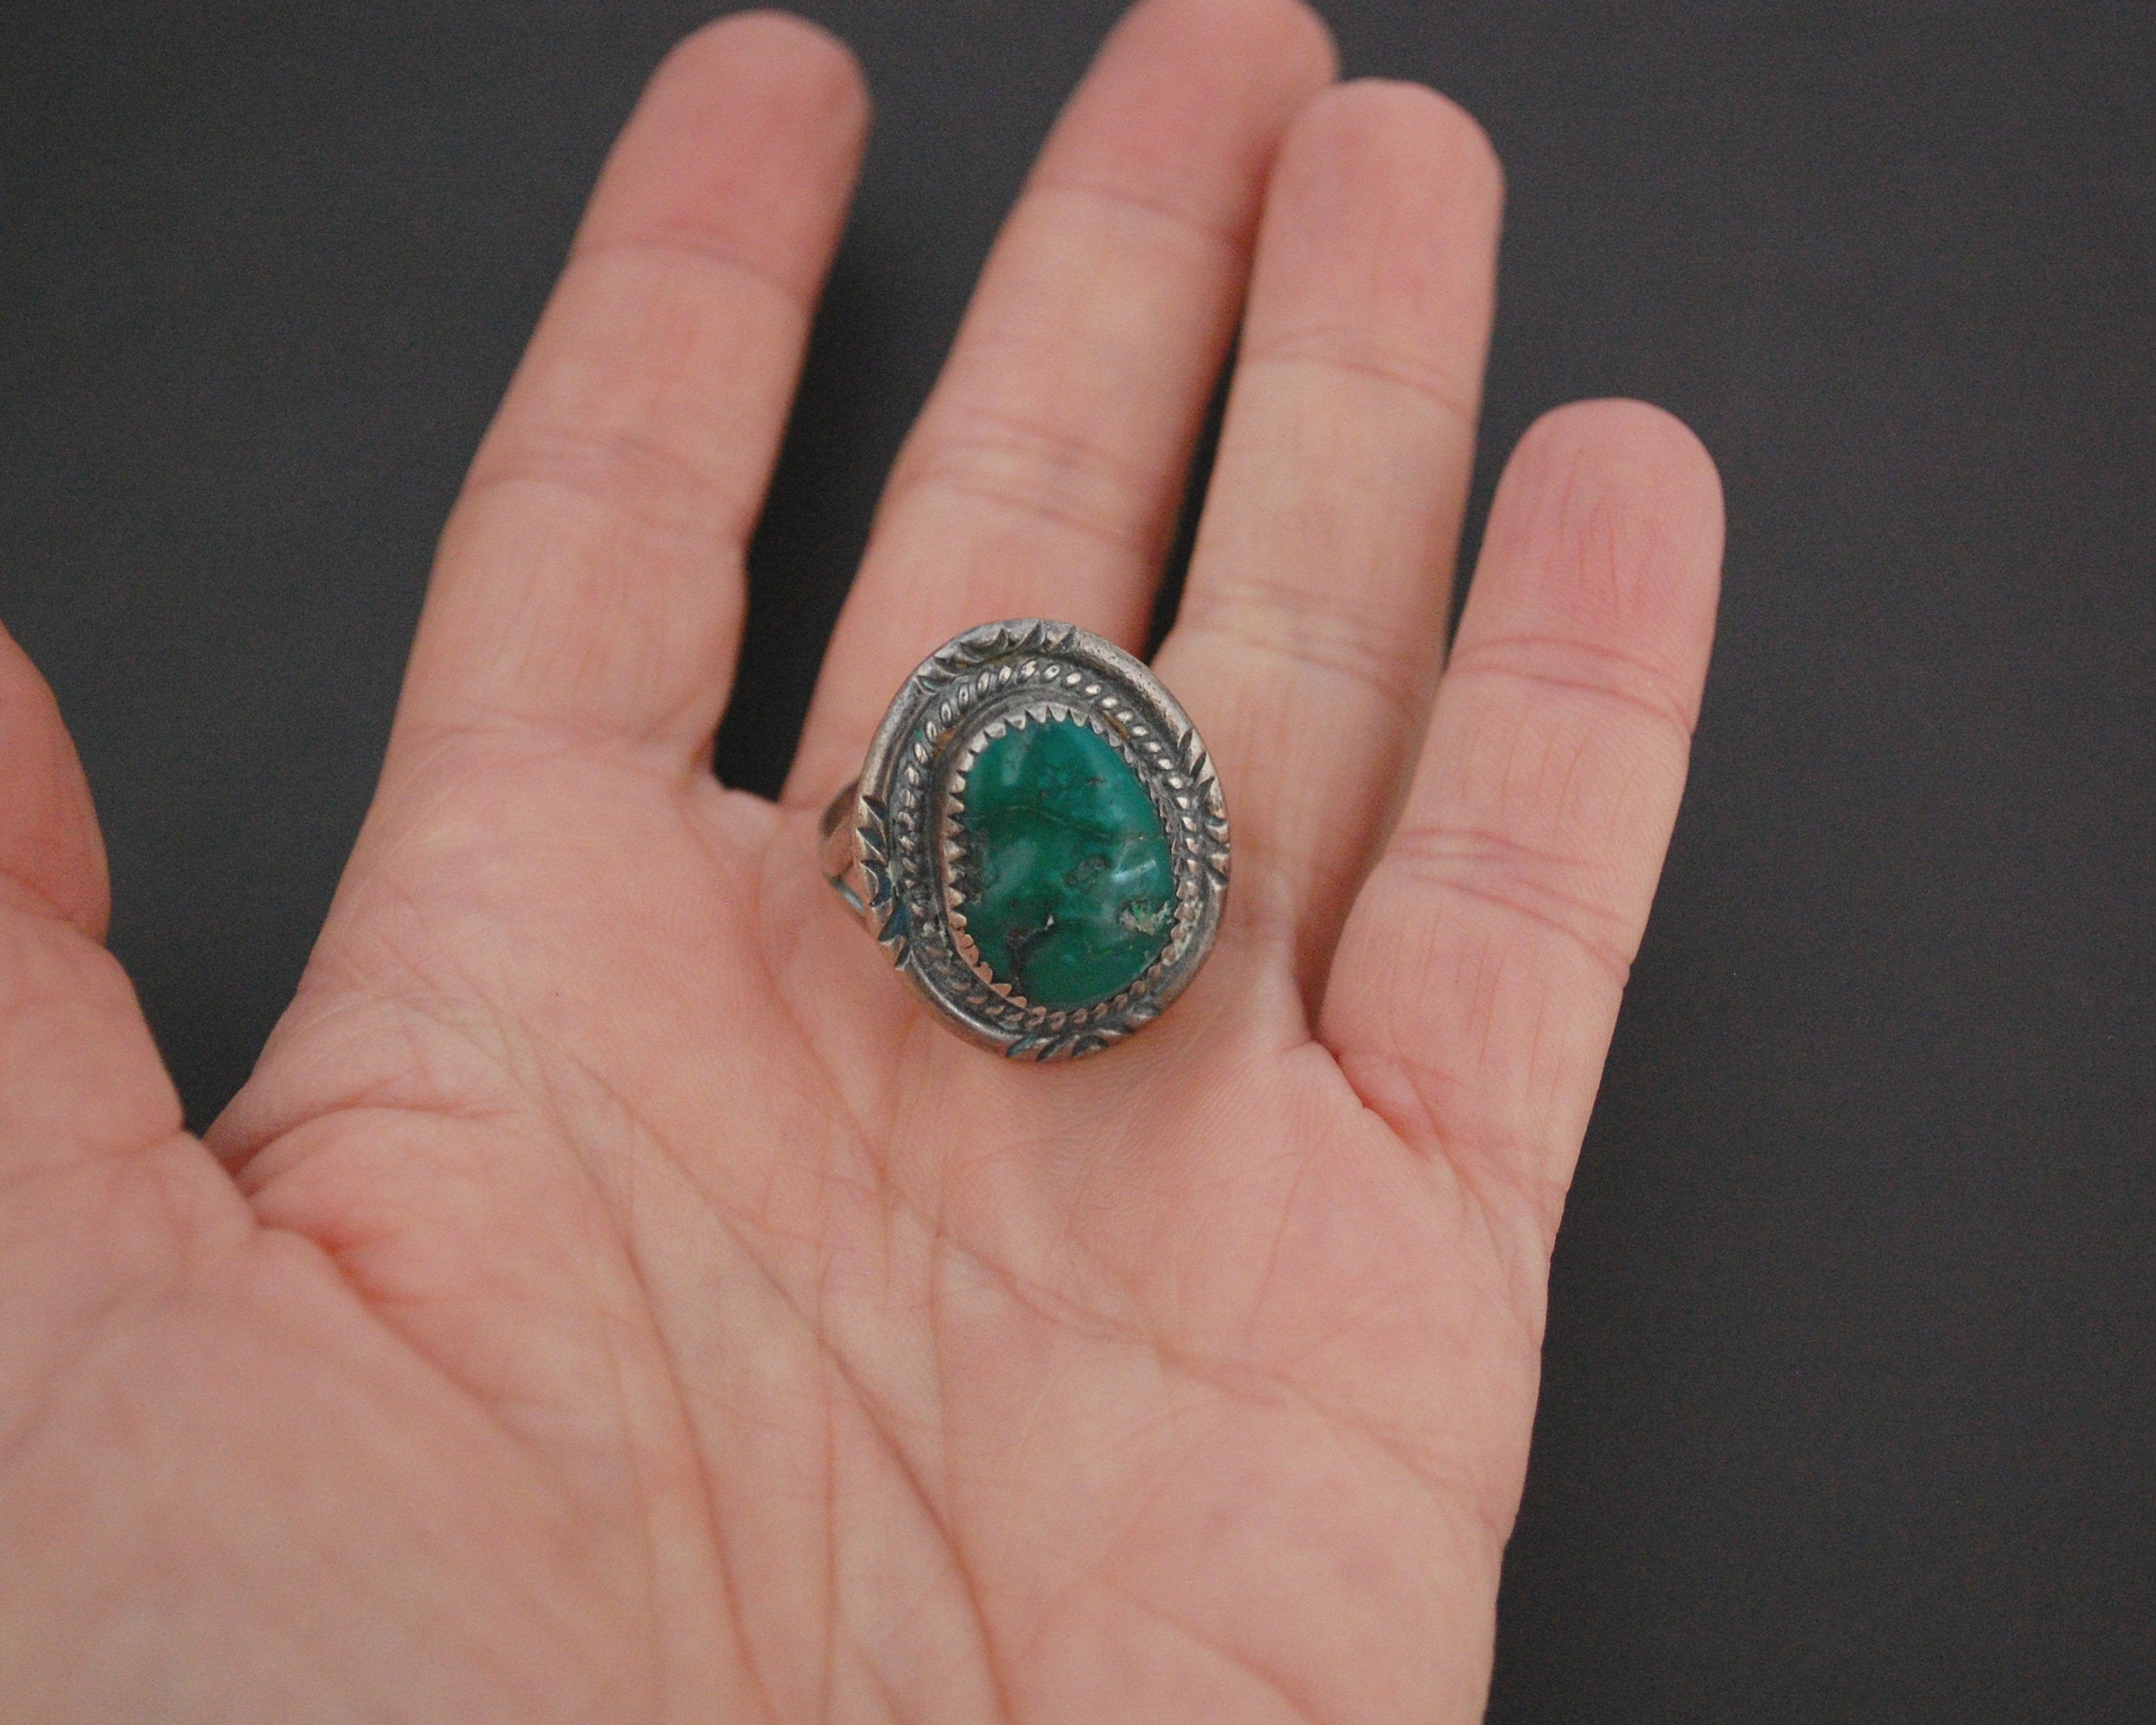 Native American Navajo Turquoise Ring - Size 8.5 - Signed M